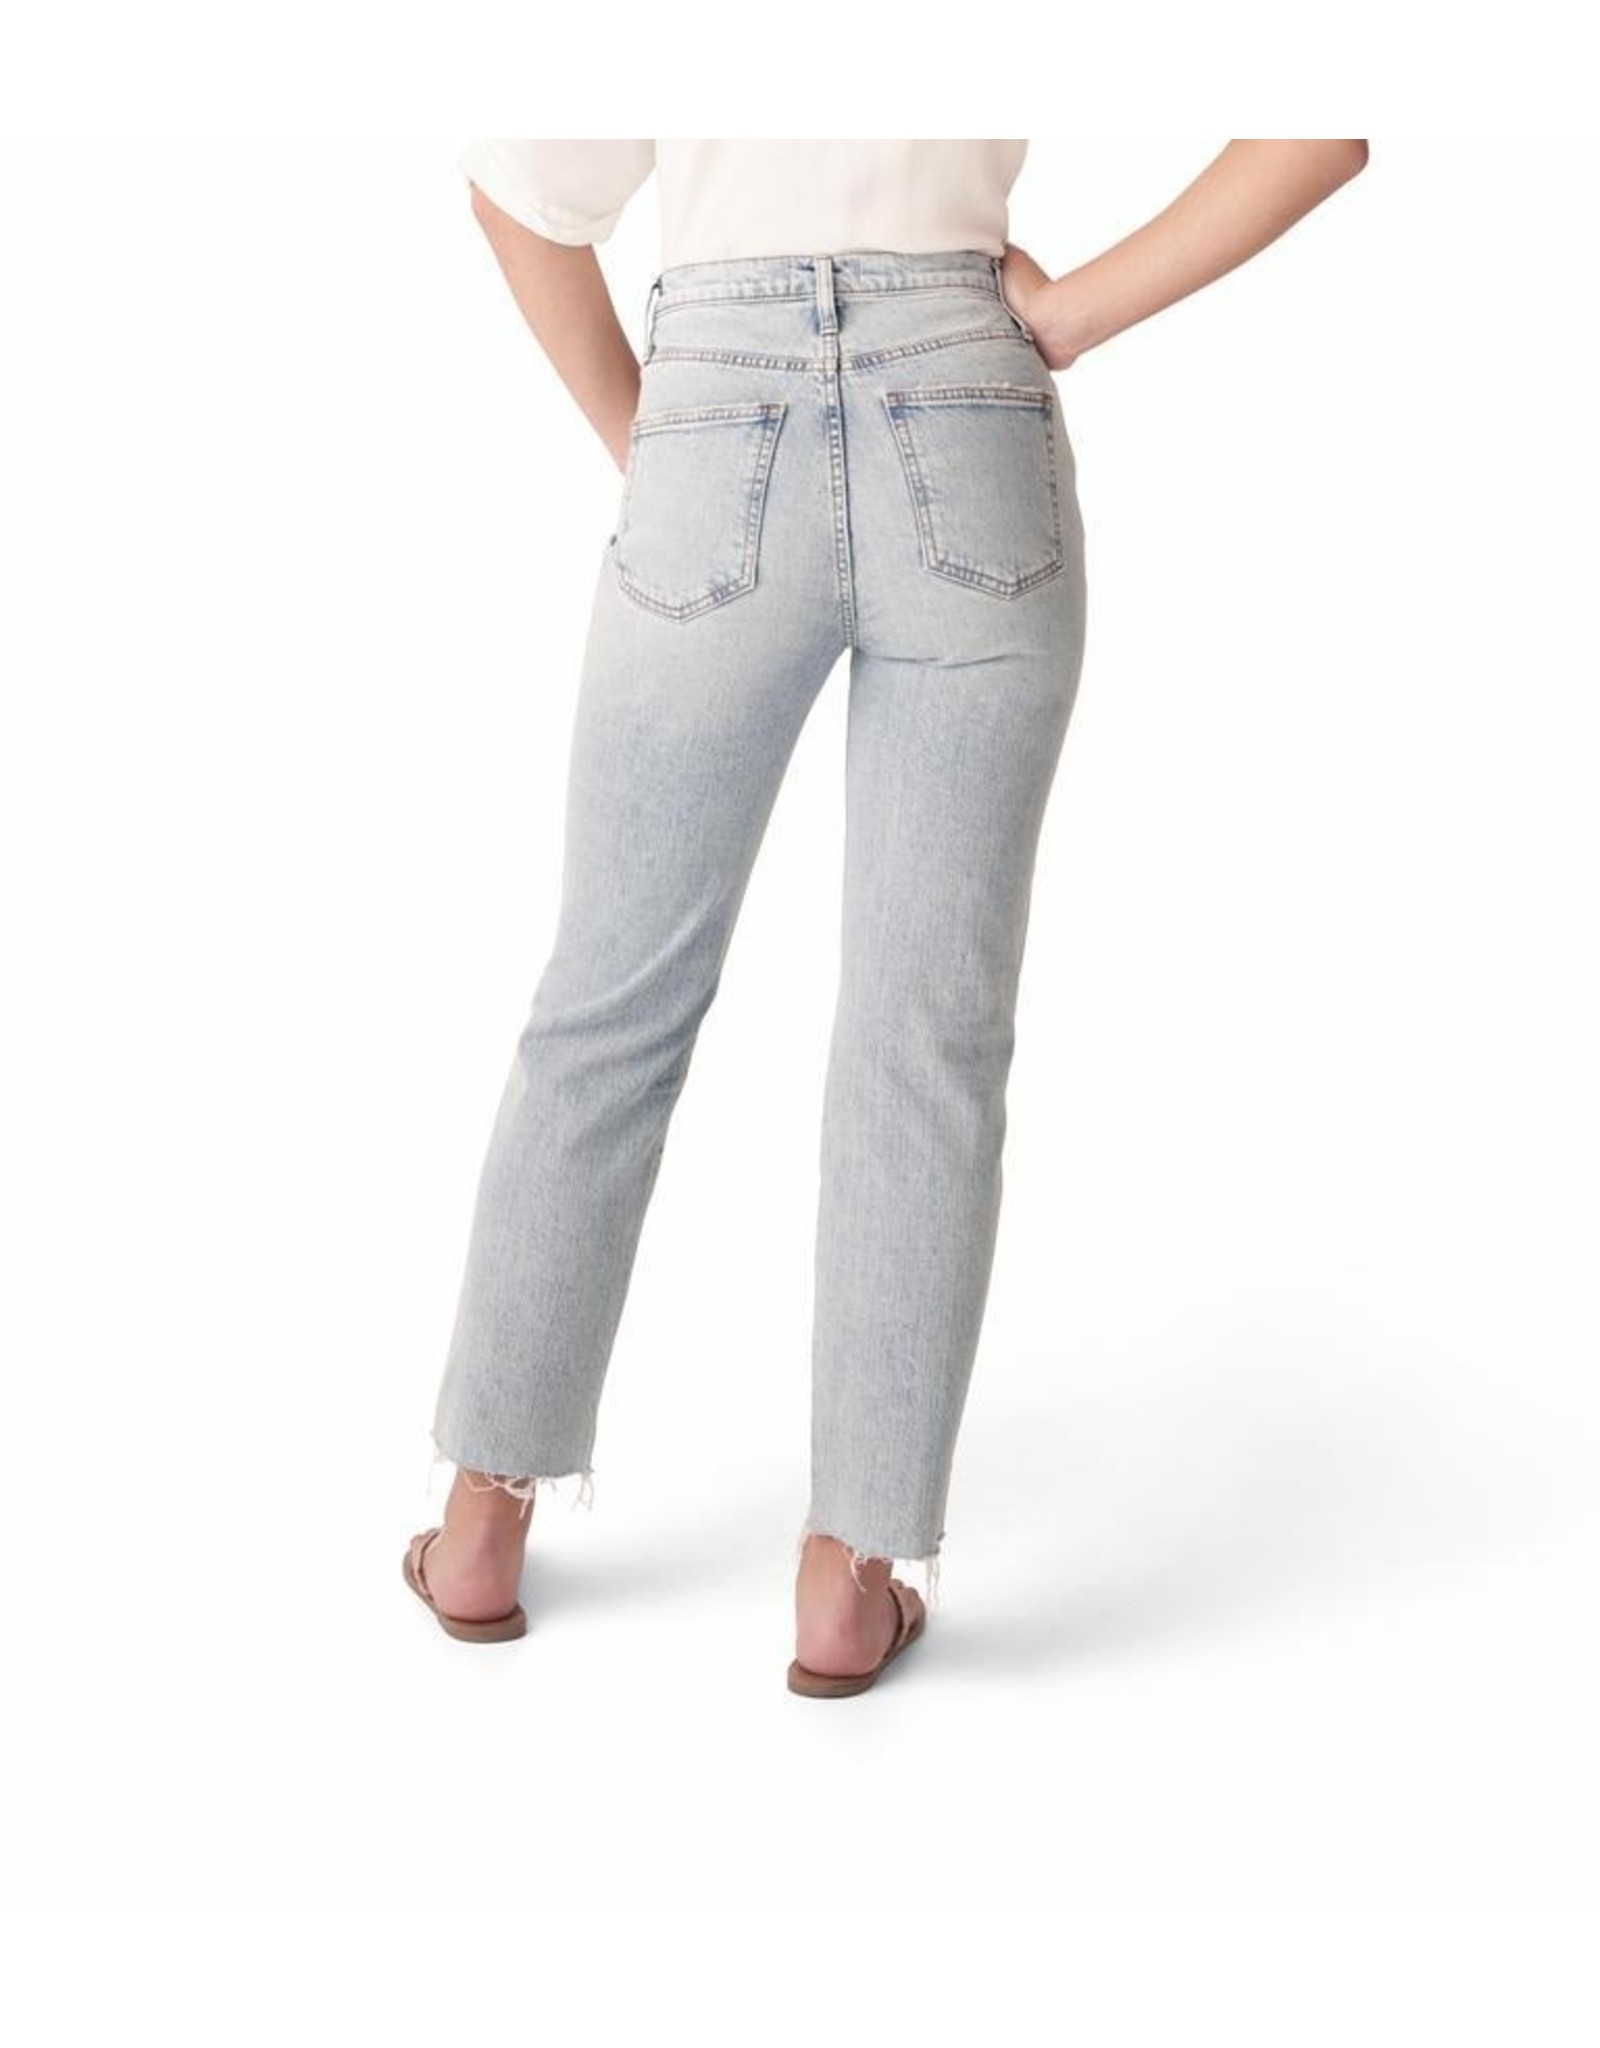 Silver Jeans - Highly Desirable Straight Leg Jeans